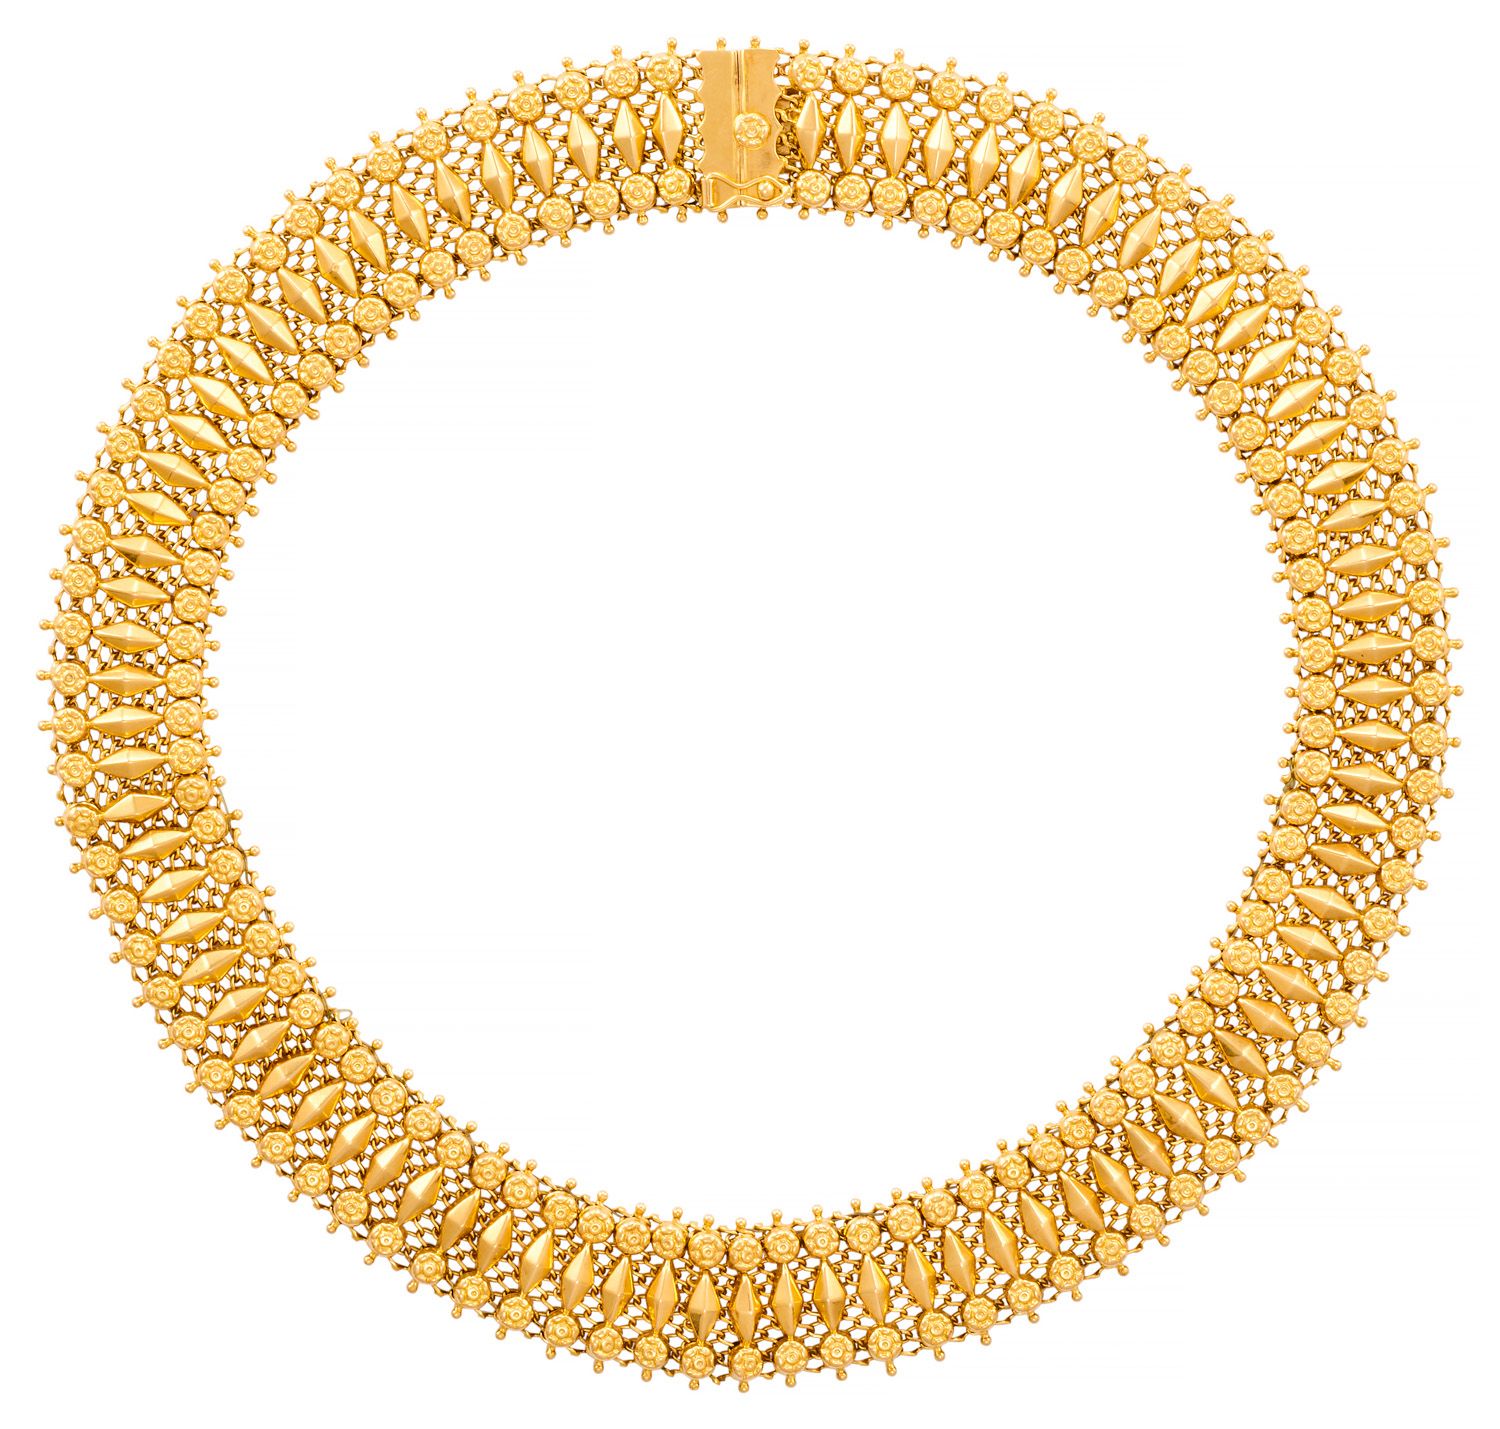 COLLIER SOUPLE Articulated necklace in yellow gold, the ends with a floral desig&hellip;